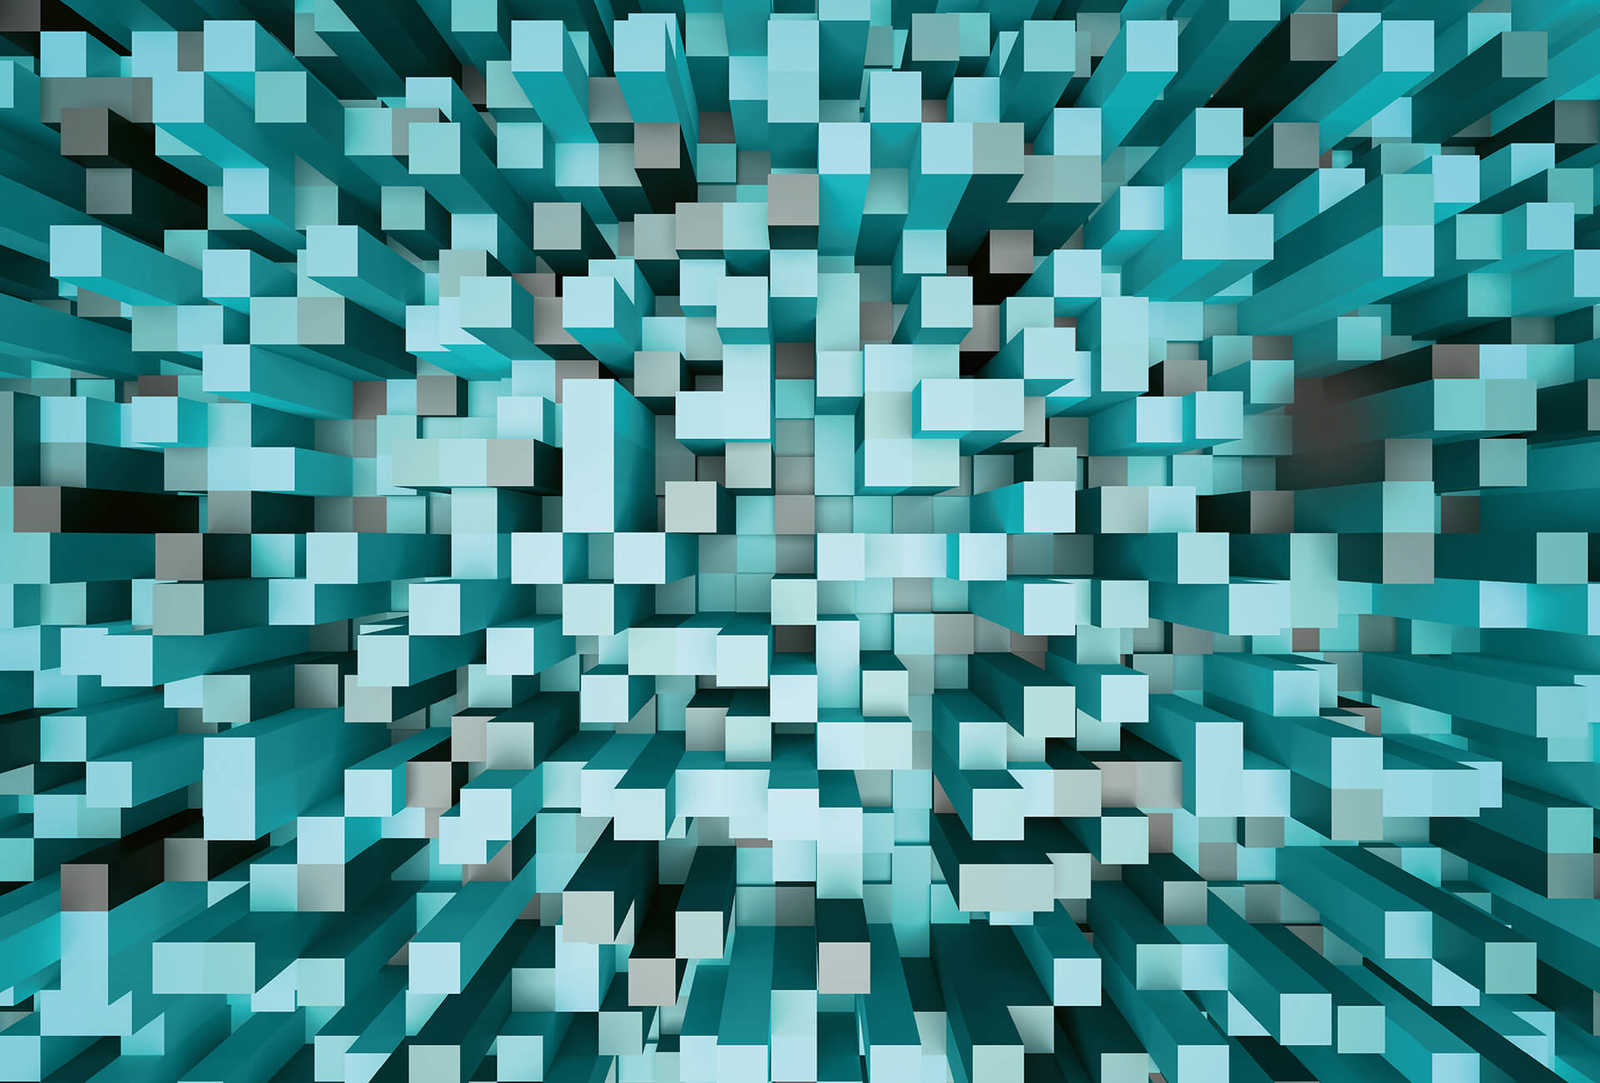         3D Pixel style square pattern mural - Turquoise
    